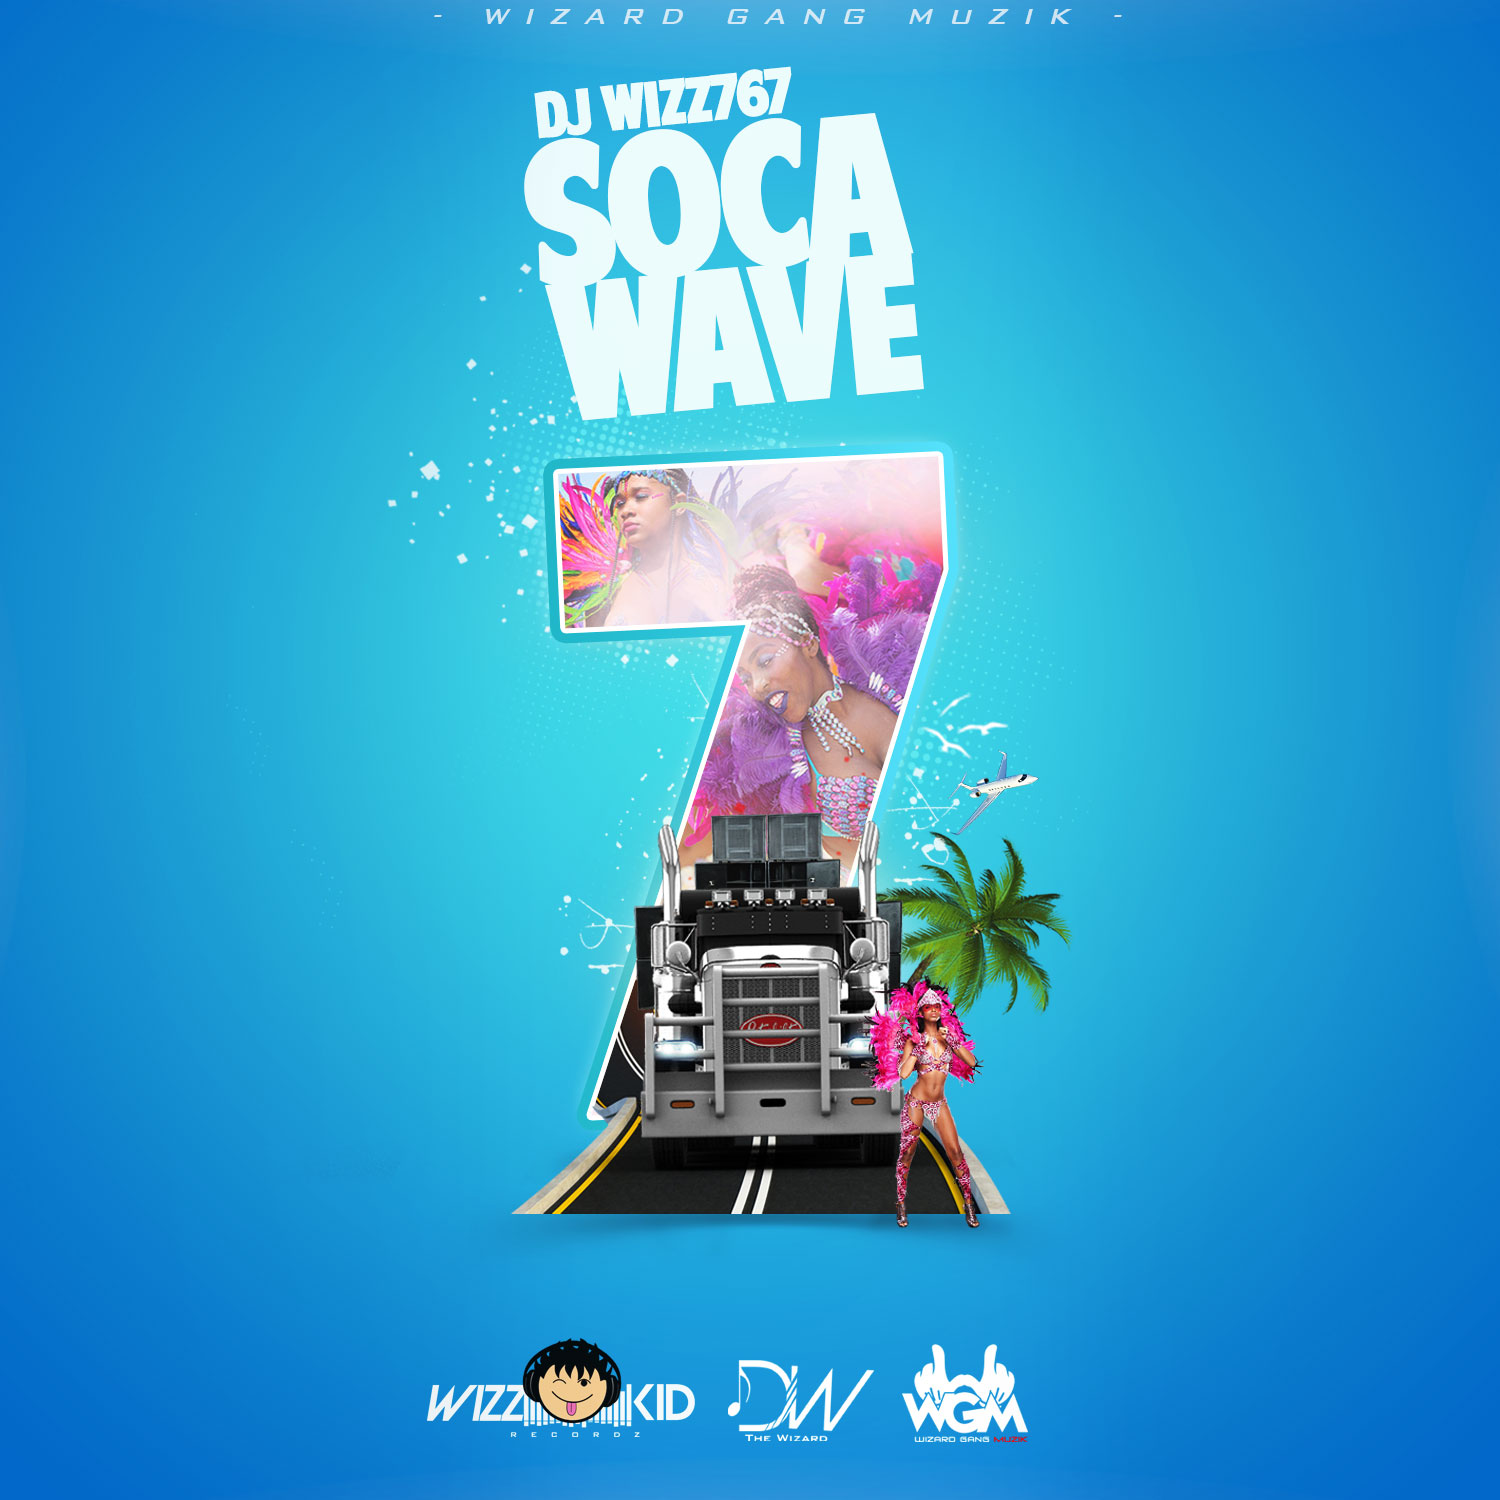 You are currently viewing Dj Wizz767 – Soca Wave 7